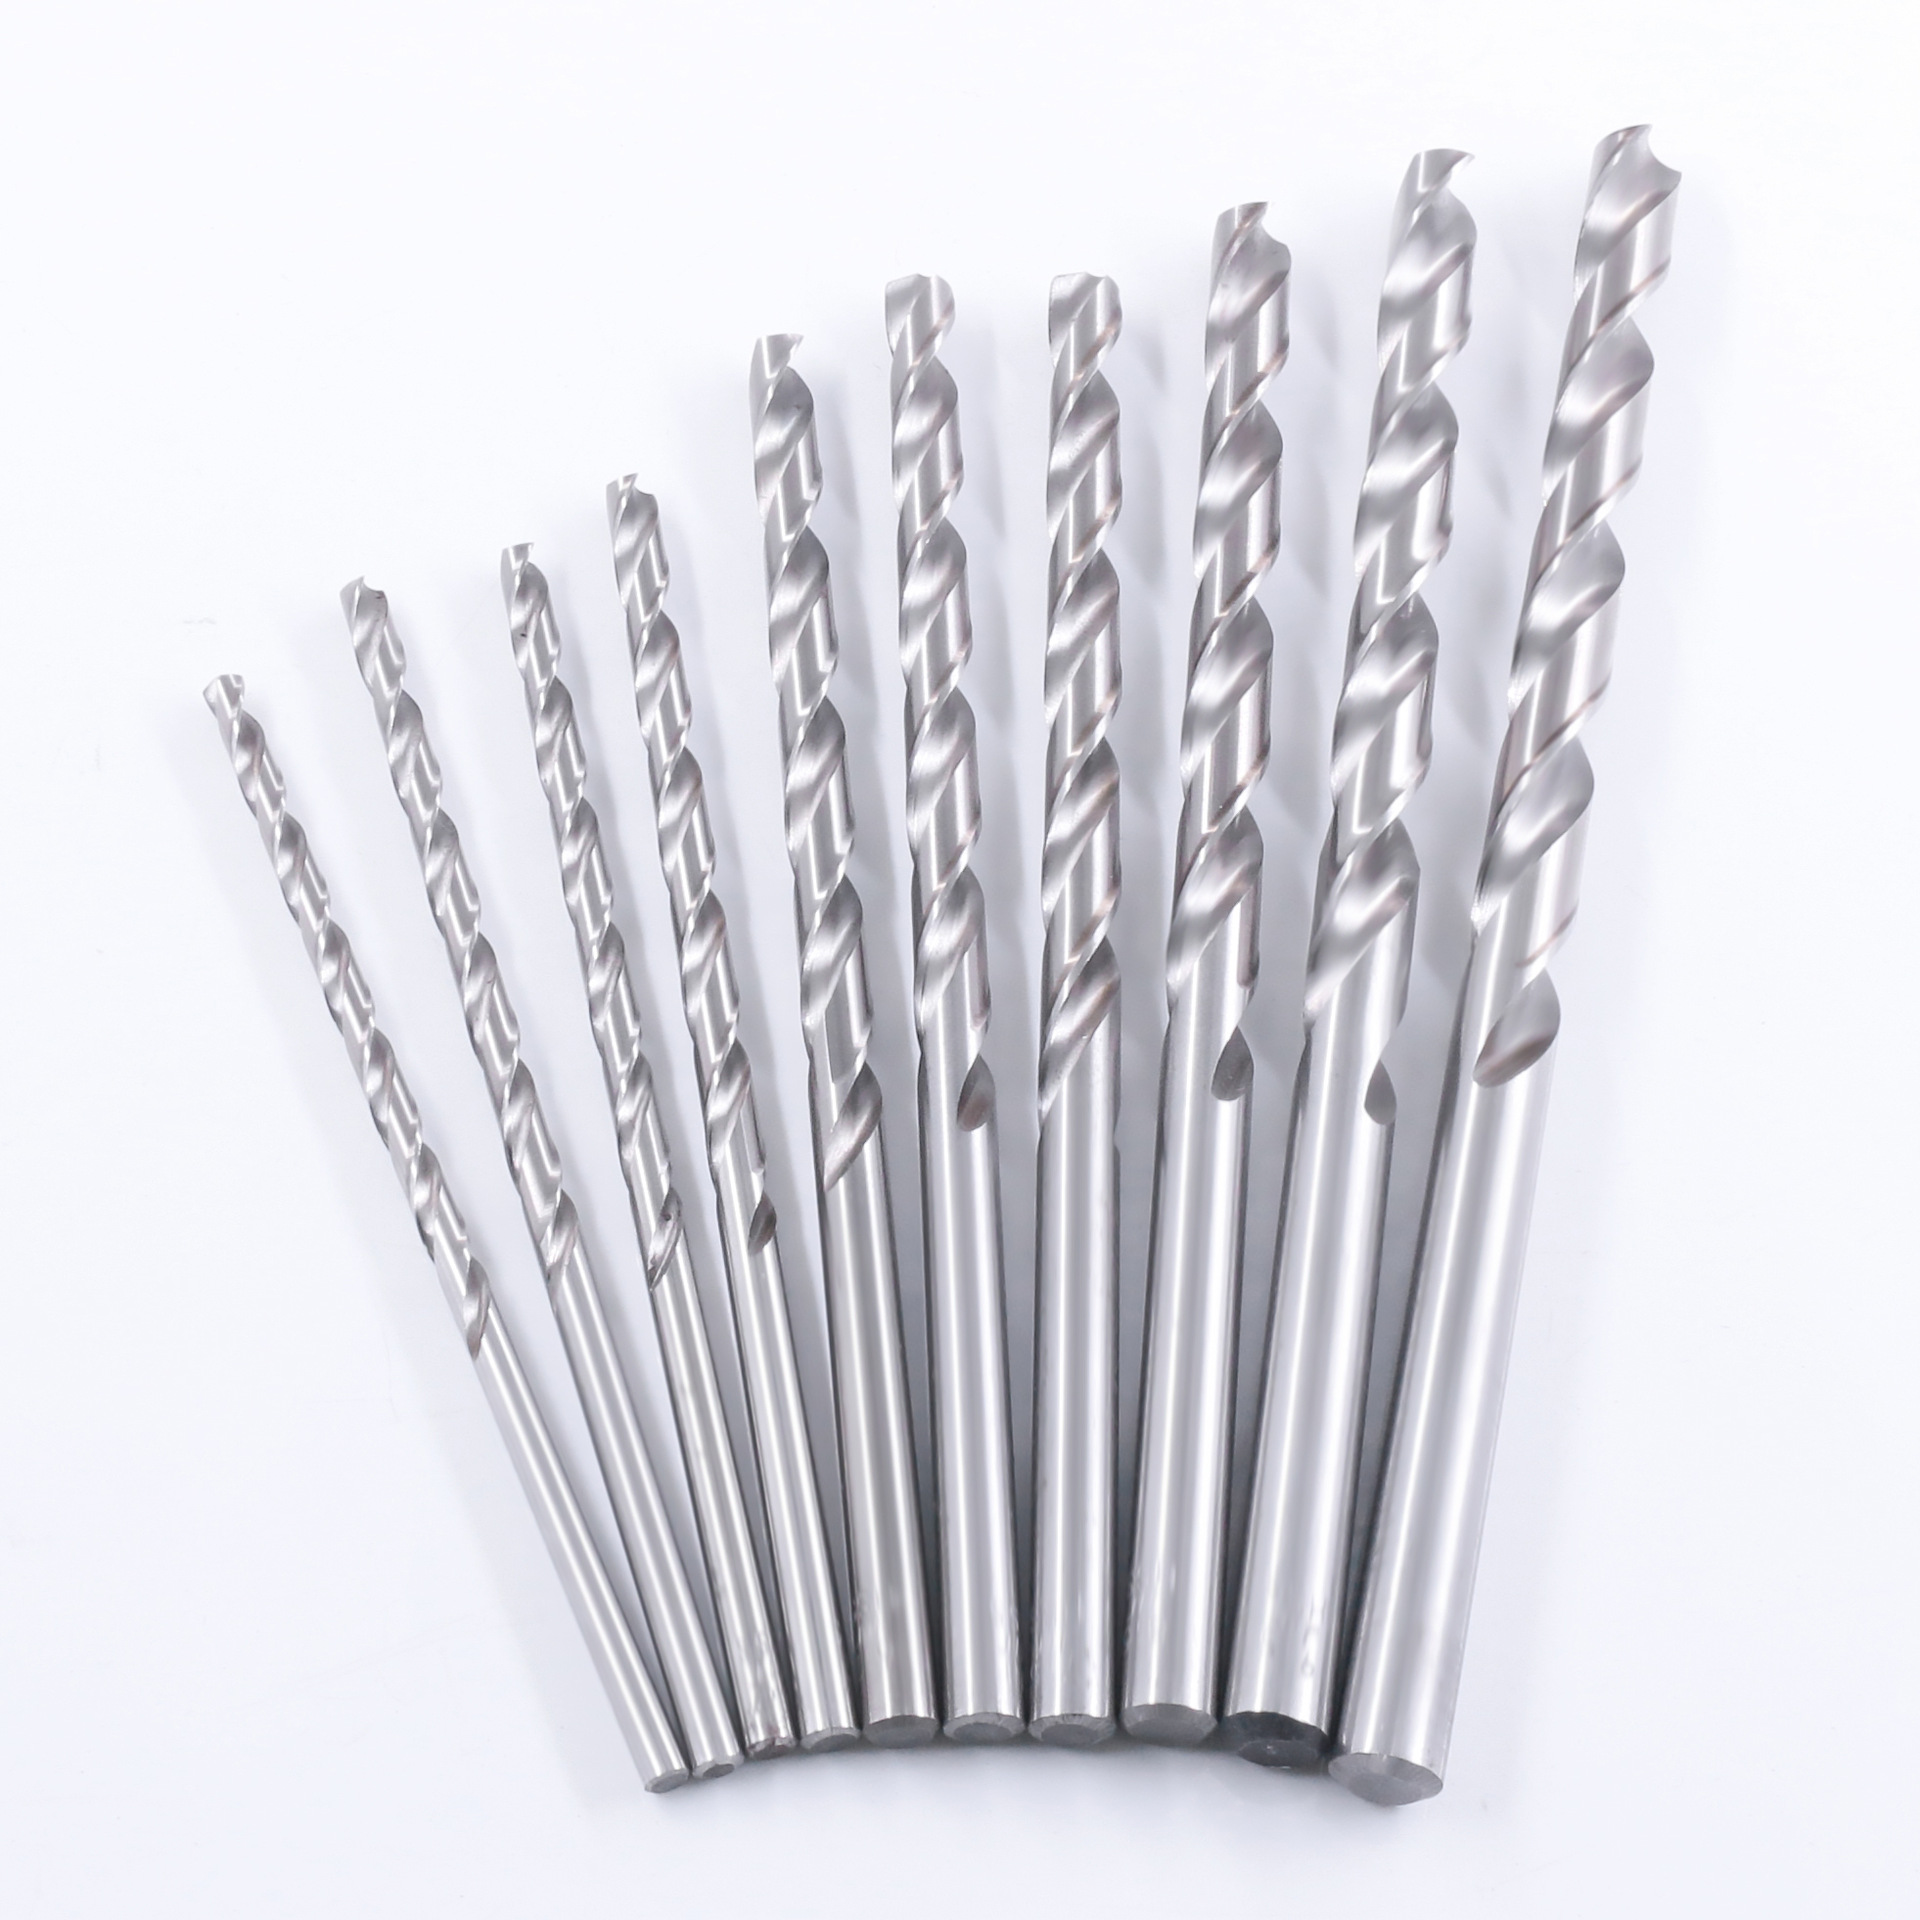 Professional Best Extended Twist Drill Bits For Metal